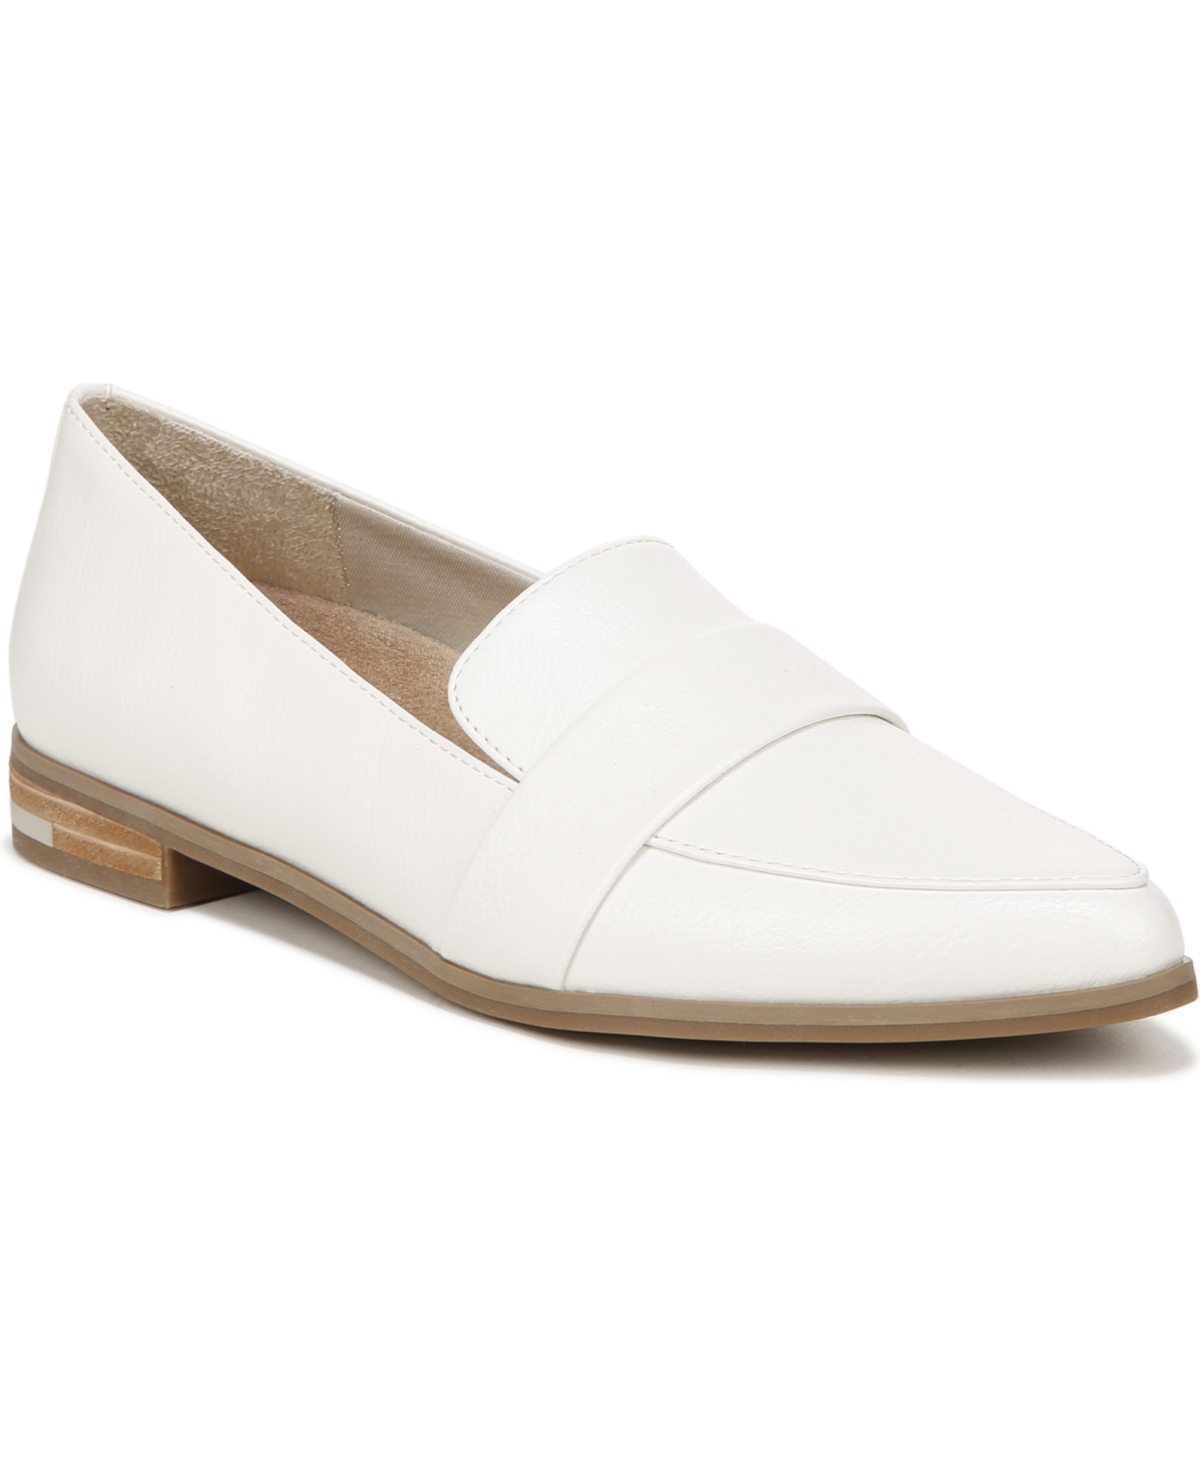 Women's Faxon Too Slip-ons - White Faux Leather